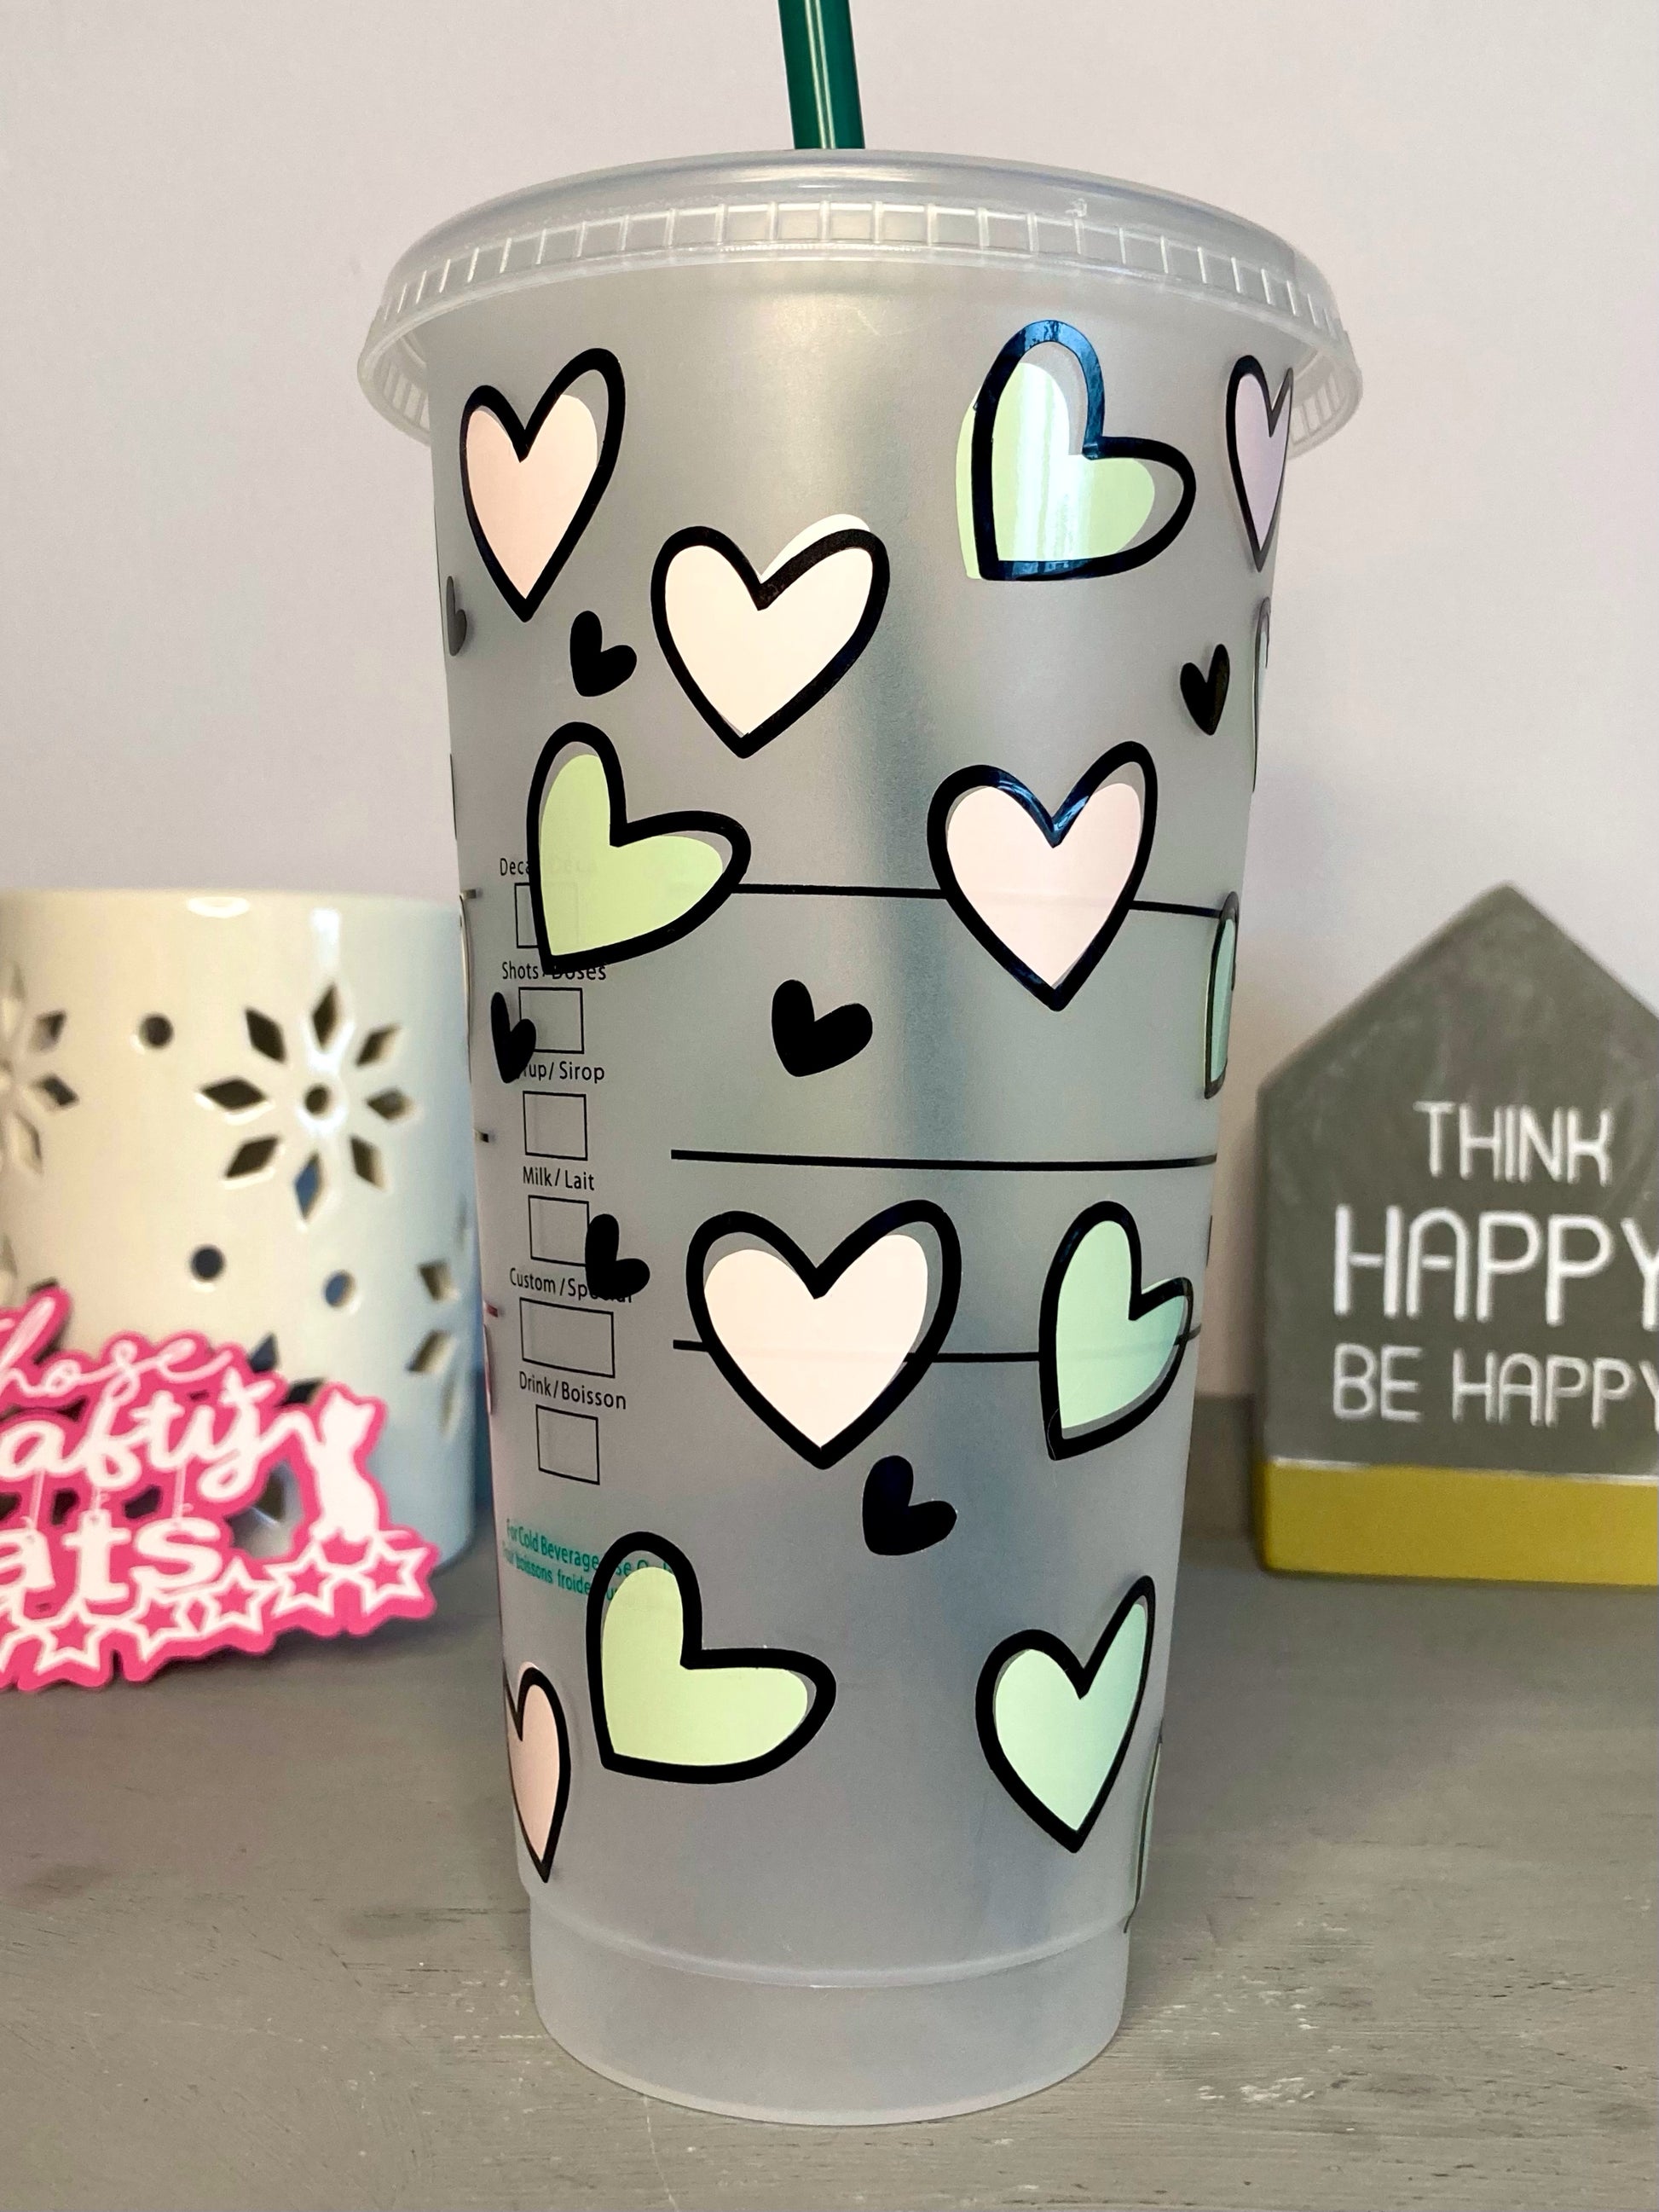 CrafTay Creations - Customized Resuable Starbucks Cups!!! Starting